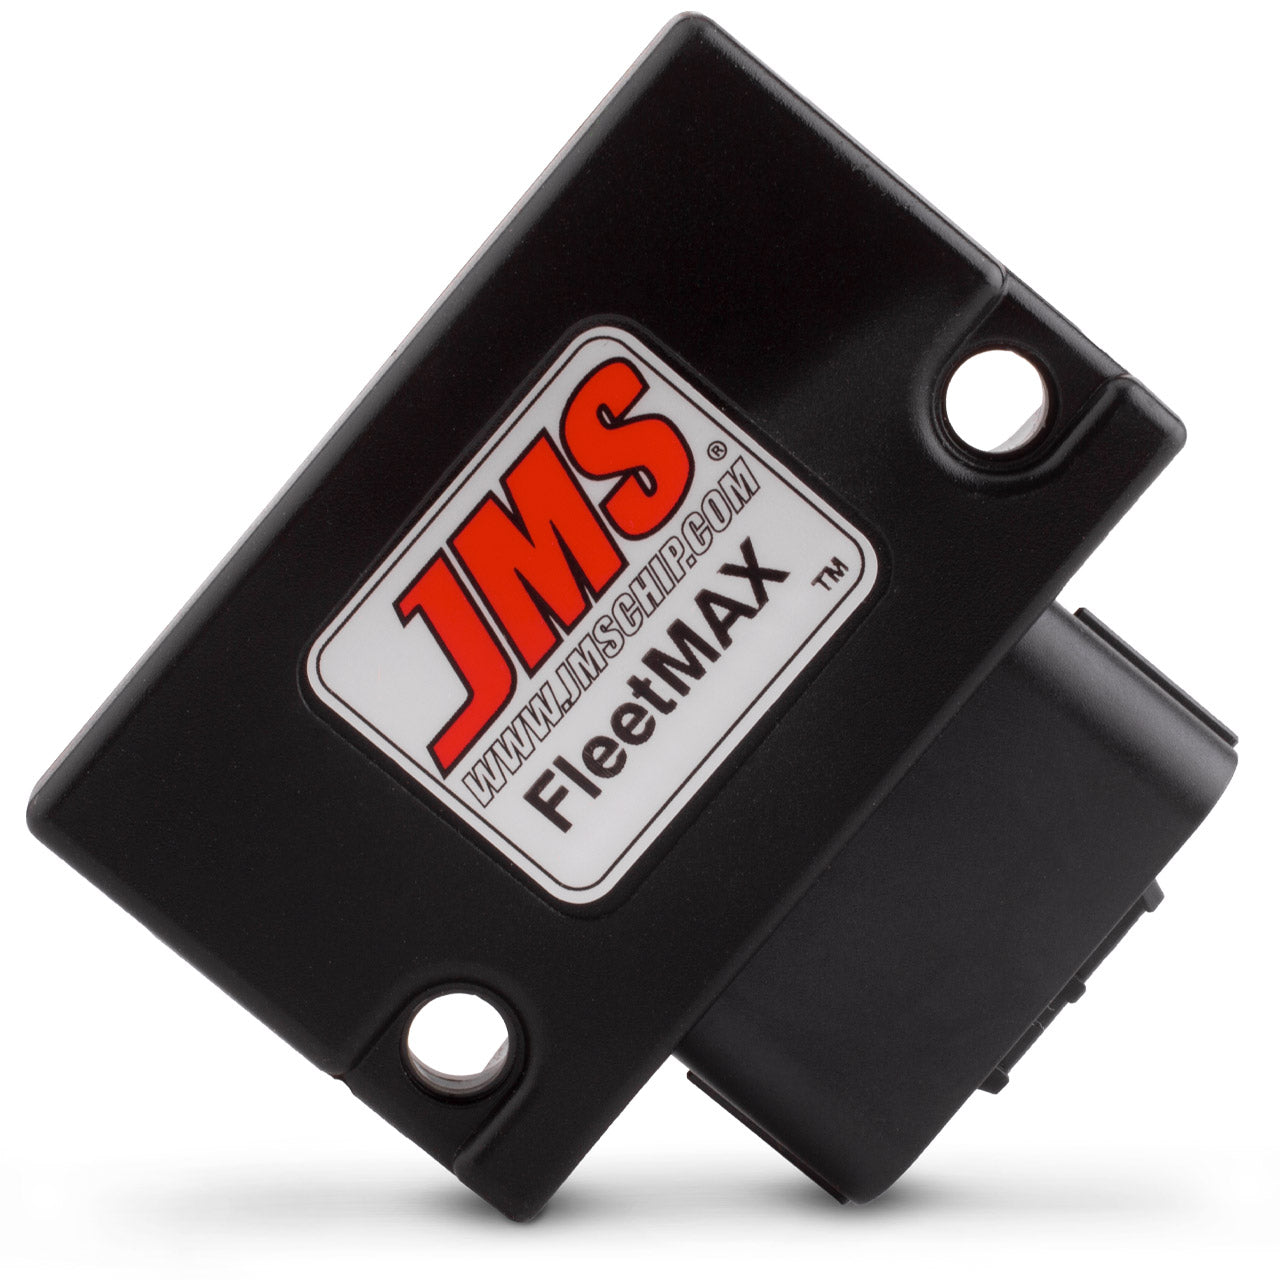 JMS FleetMAX Speed Control Device. Plug and Play for 2019 - 2021 Dodge RAM and Jeep Vehicles with electronic throttle control FX71920DCX4